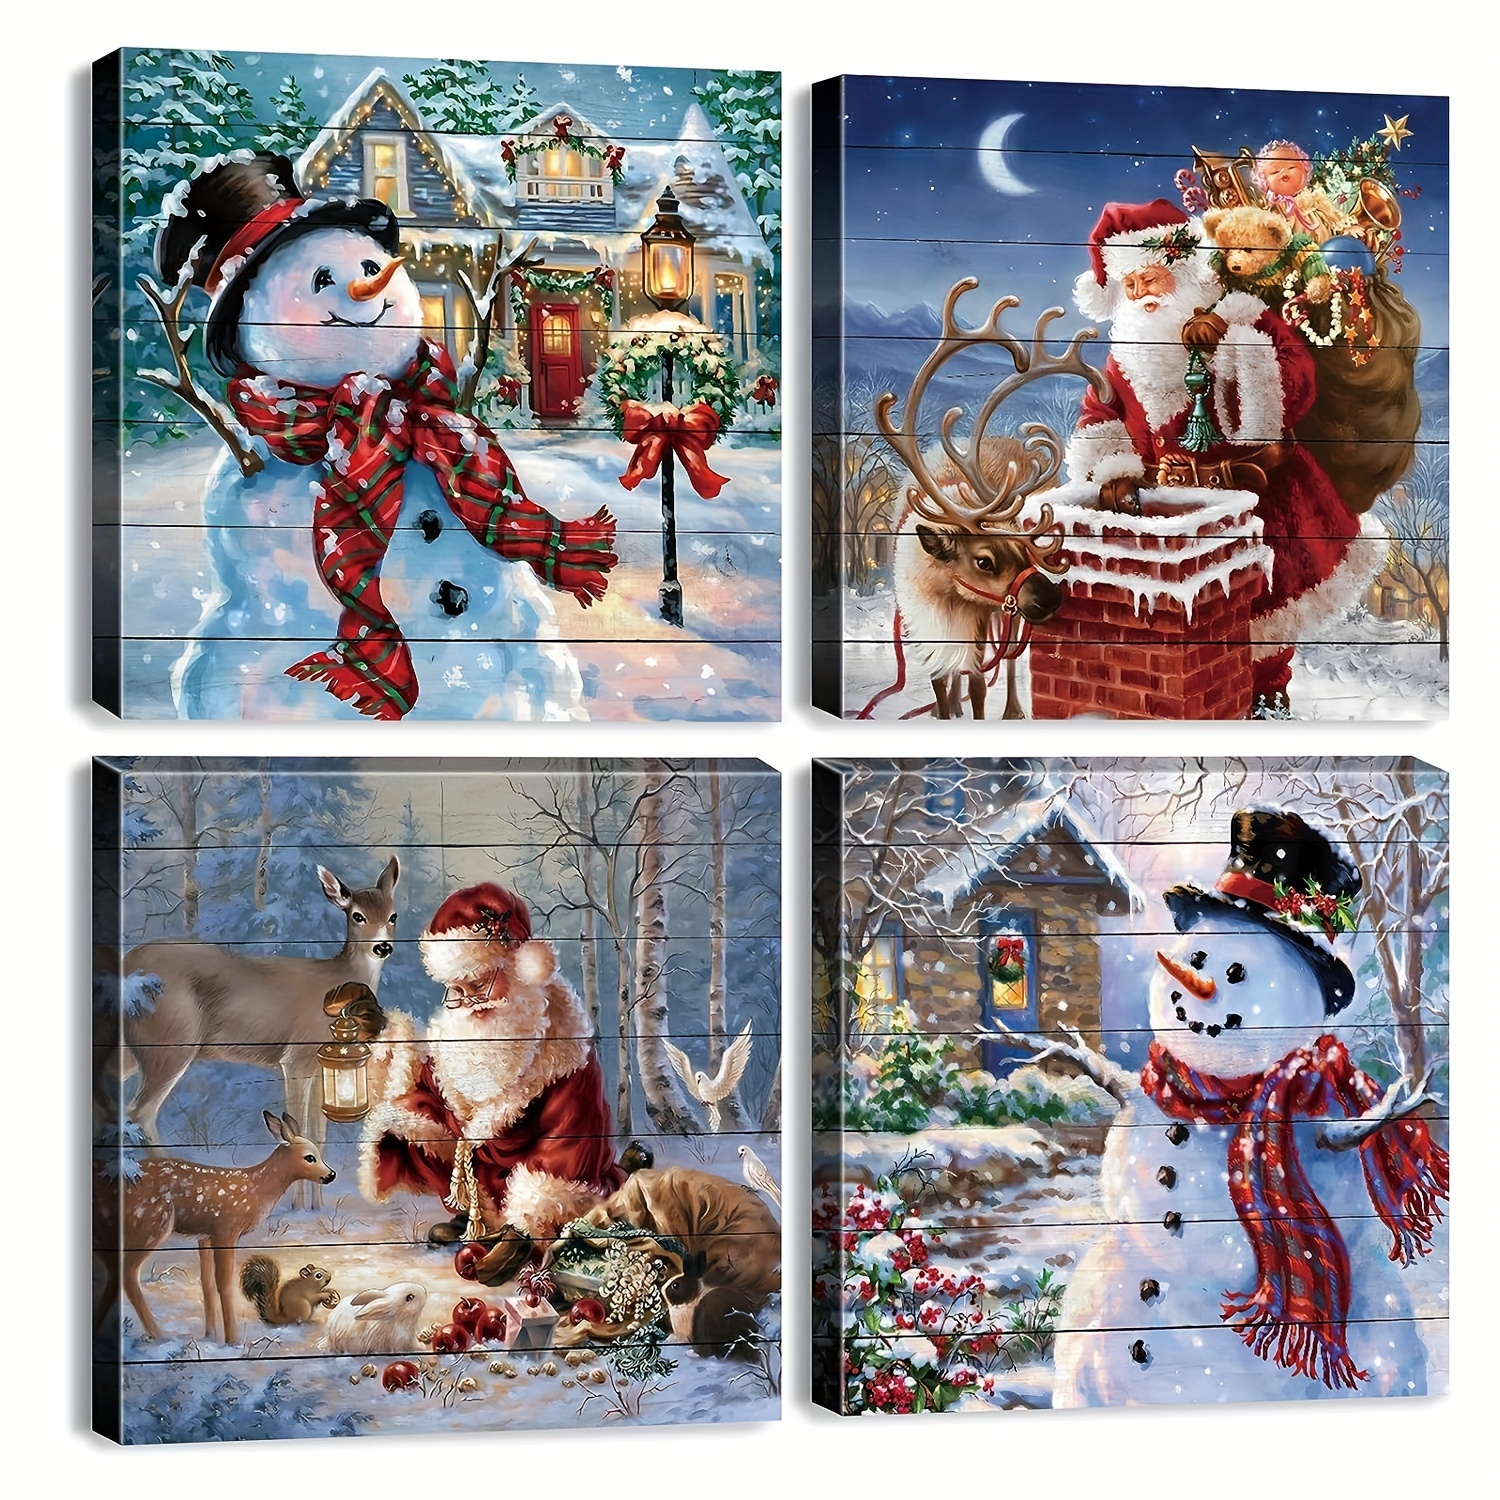  Diamond Painting Kits for Adults, DIY 5D Christmas Day Diamond  Painting Kits Full Drill Fall Diamond Art Animals and Snowmen Diamond  Painting Craft for Home Wall Art Decor 12x18 inch